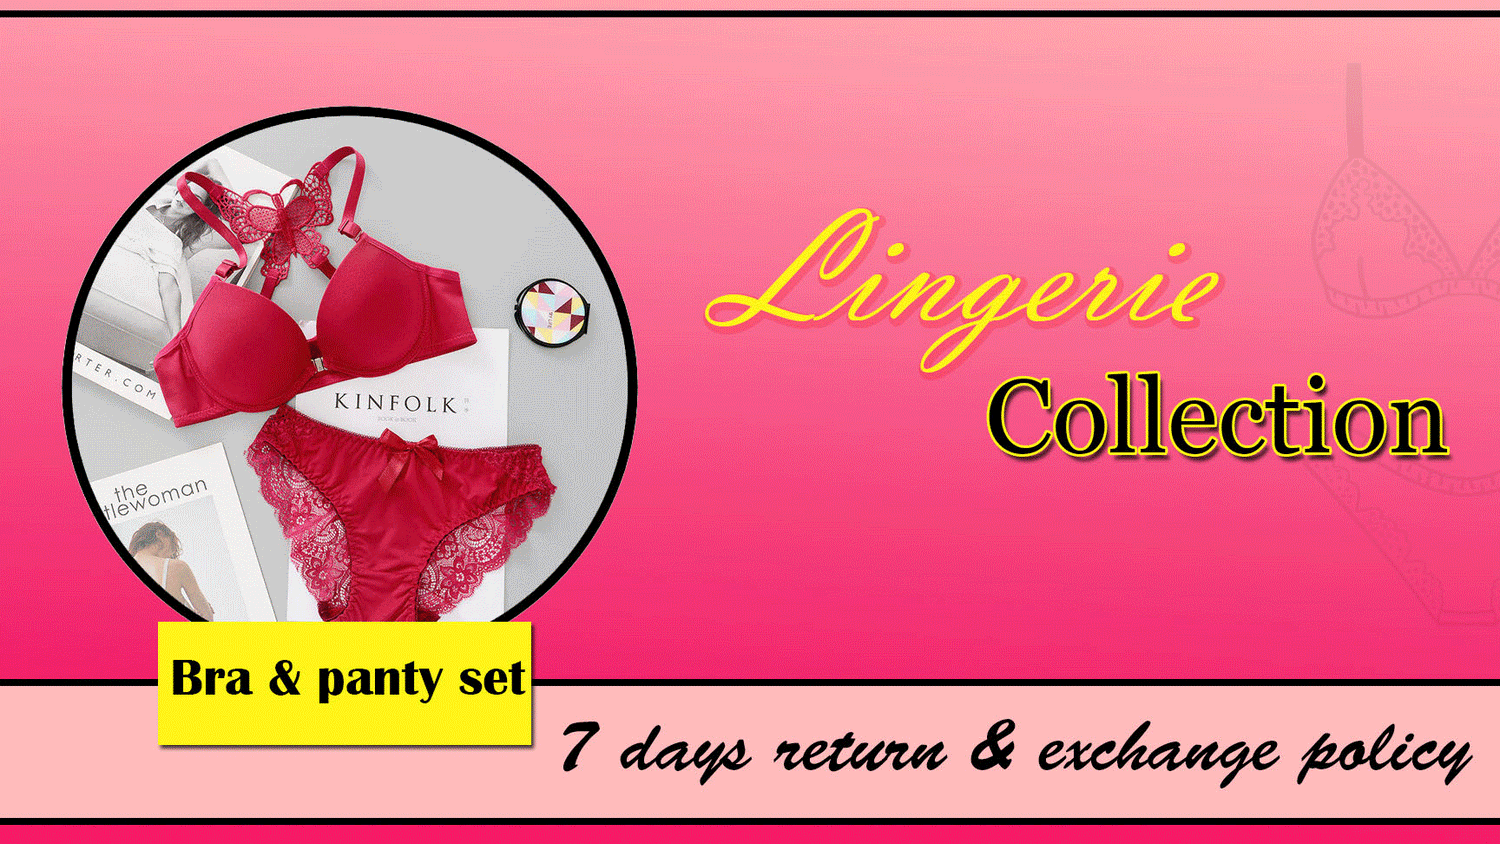 Pack Of 6 Disposable Brief Panties For Women Price in Pakistan - View  Latest Collection of Lingerie